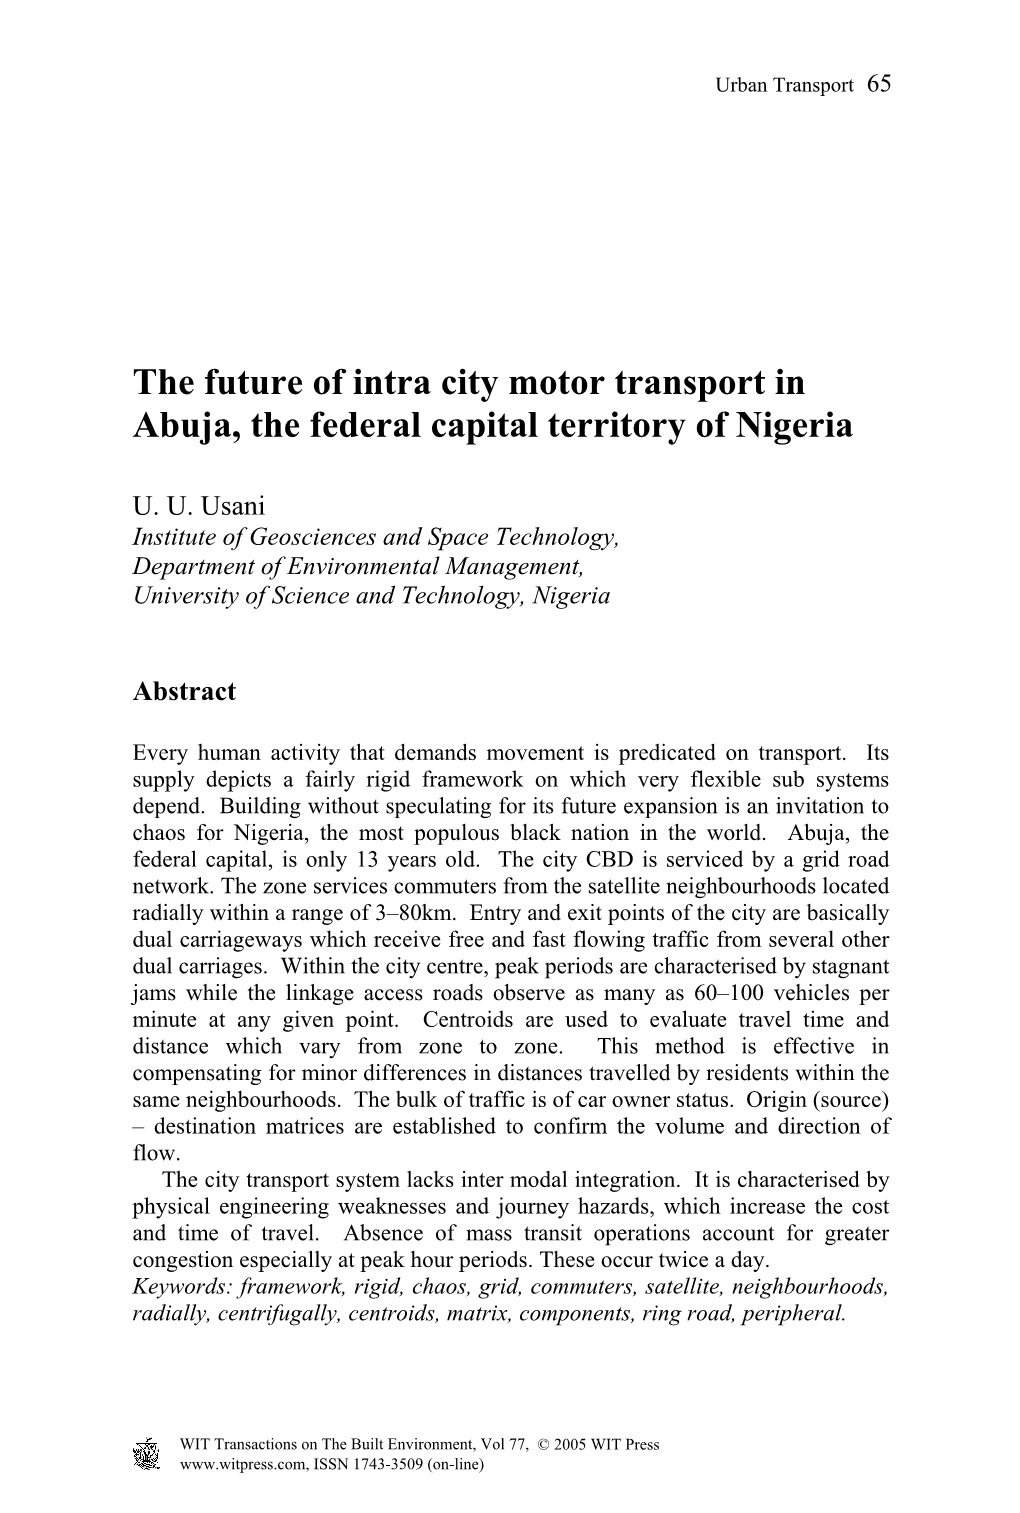 The Future of Intra City Motor Transport in Abuja, the Federal Capital Territory of Nigeria